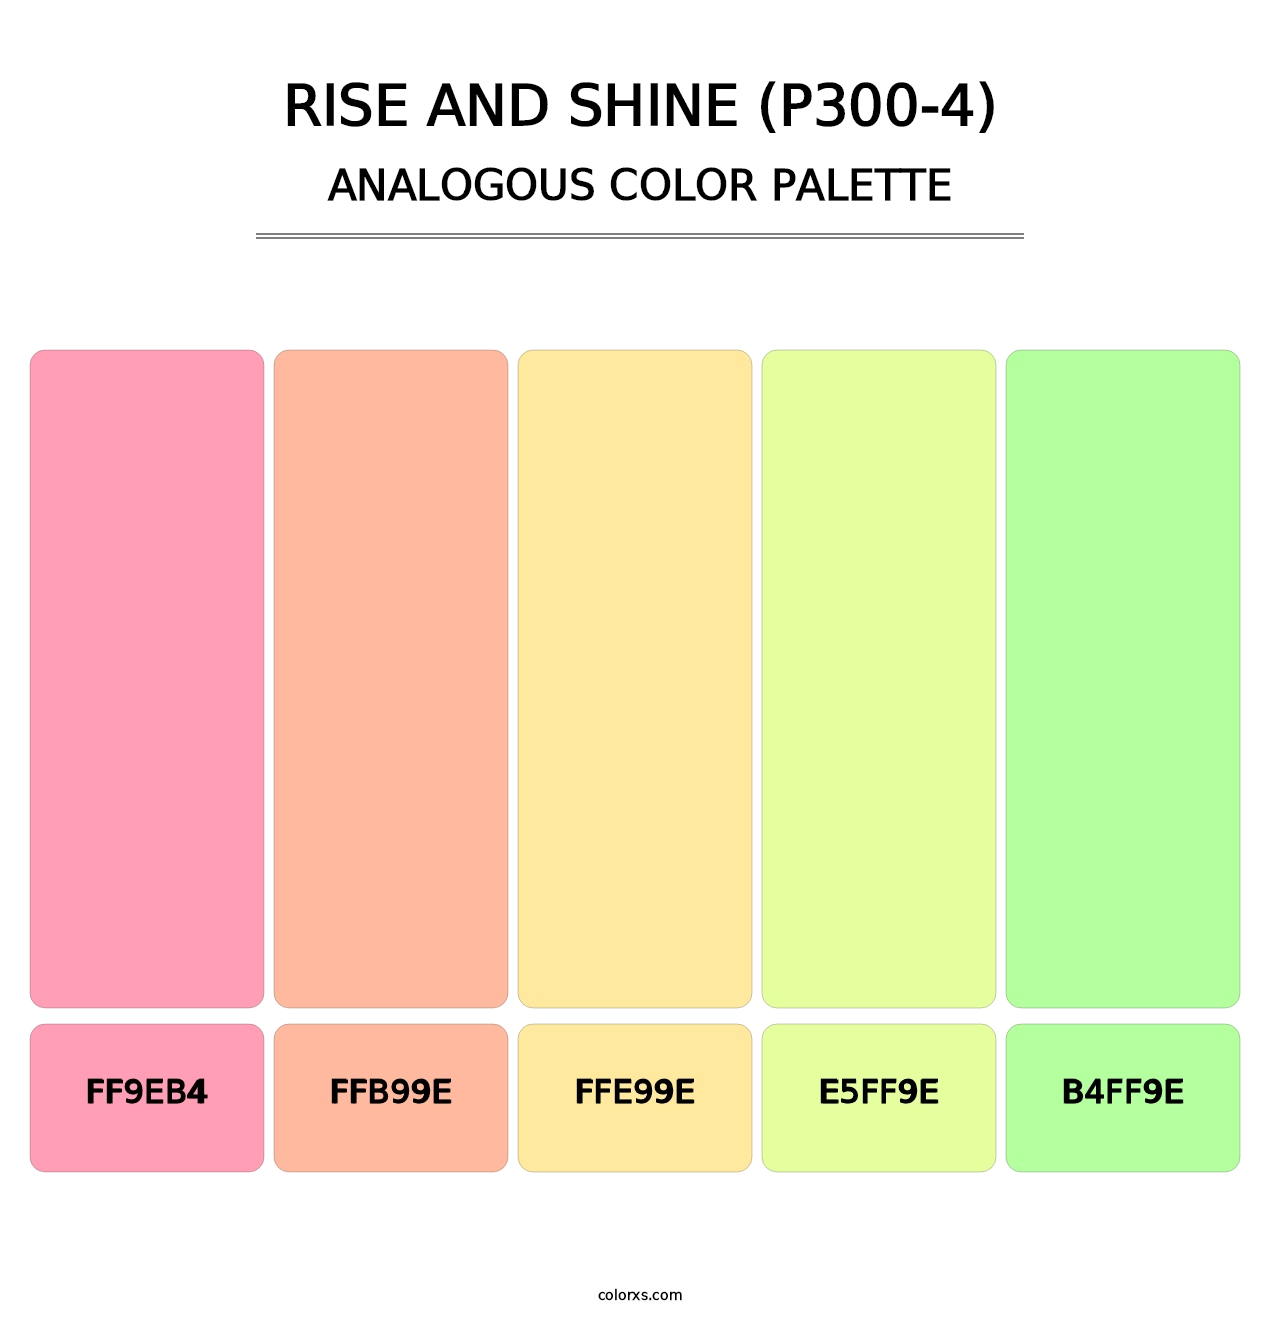 Rise And Shine (P300-4) - Analogous Color Palette